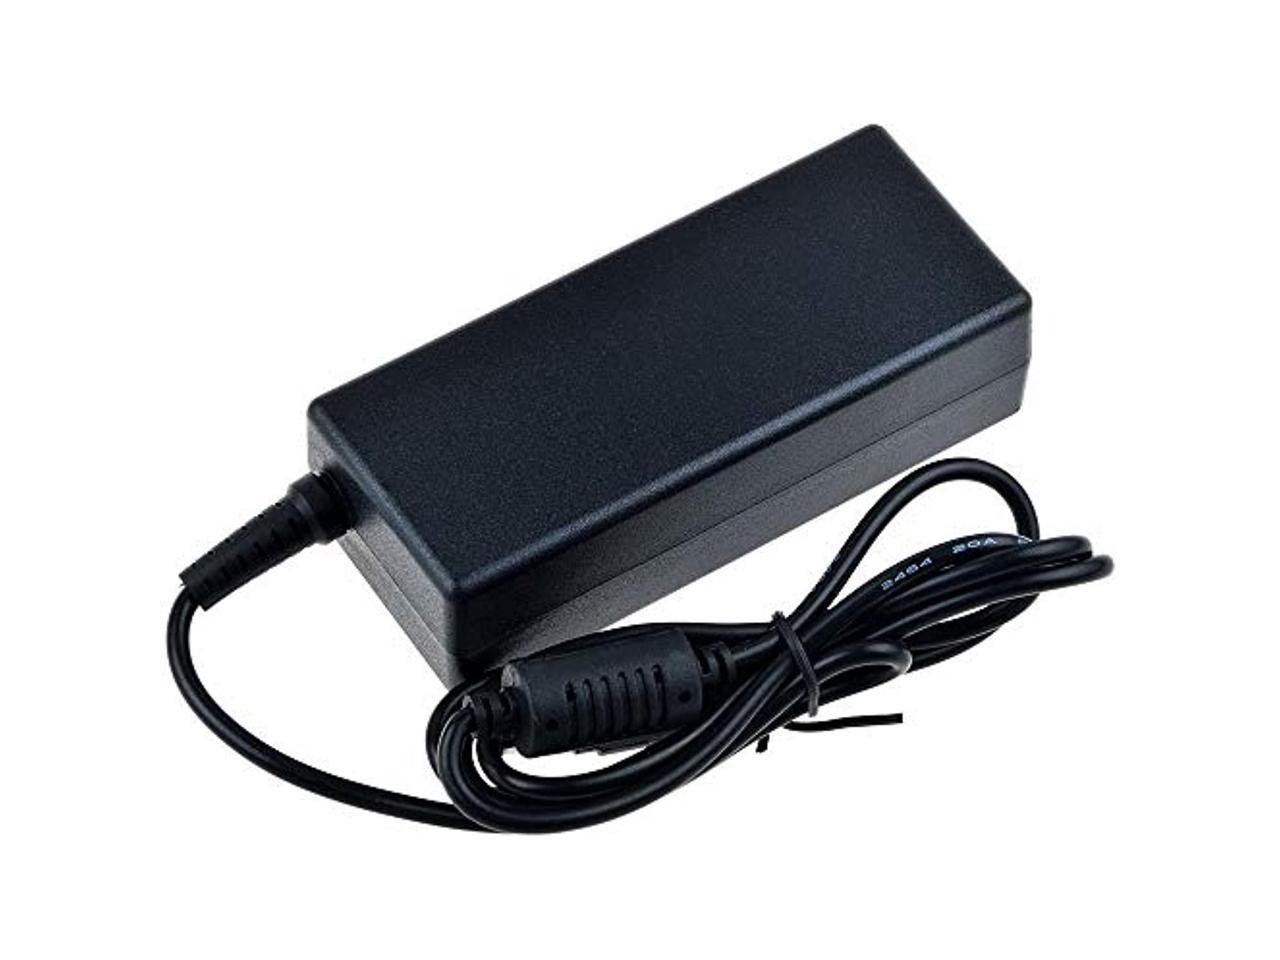 AC Power Adapter For SONY RDP-X30iP RDPX30IP AC-ES1820 Speaker iPod iPhone Dock 